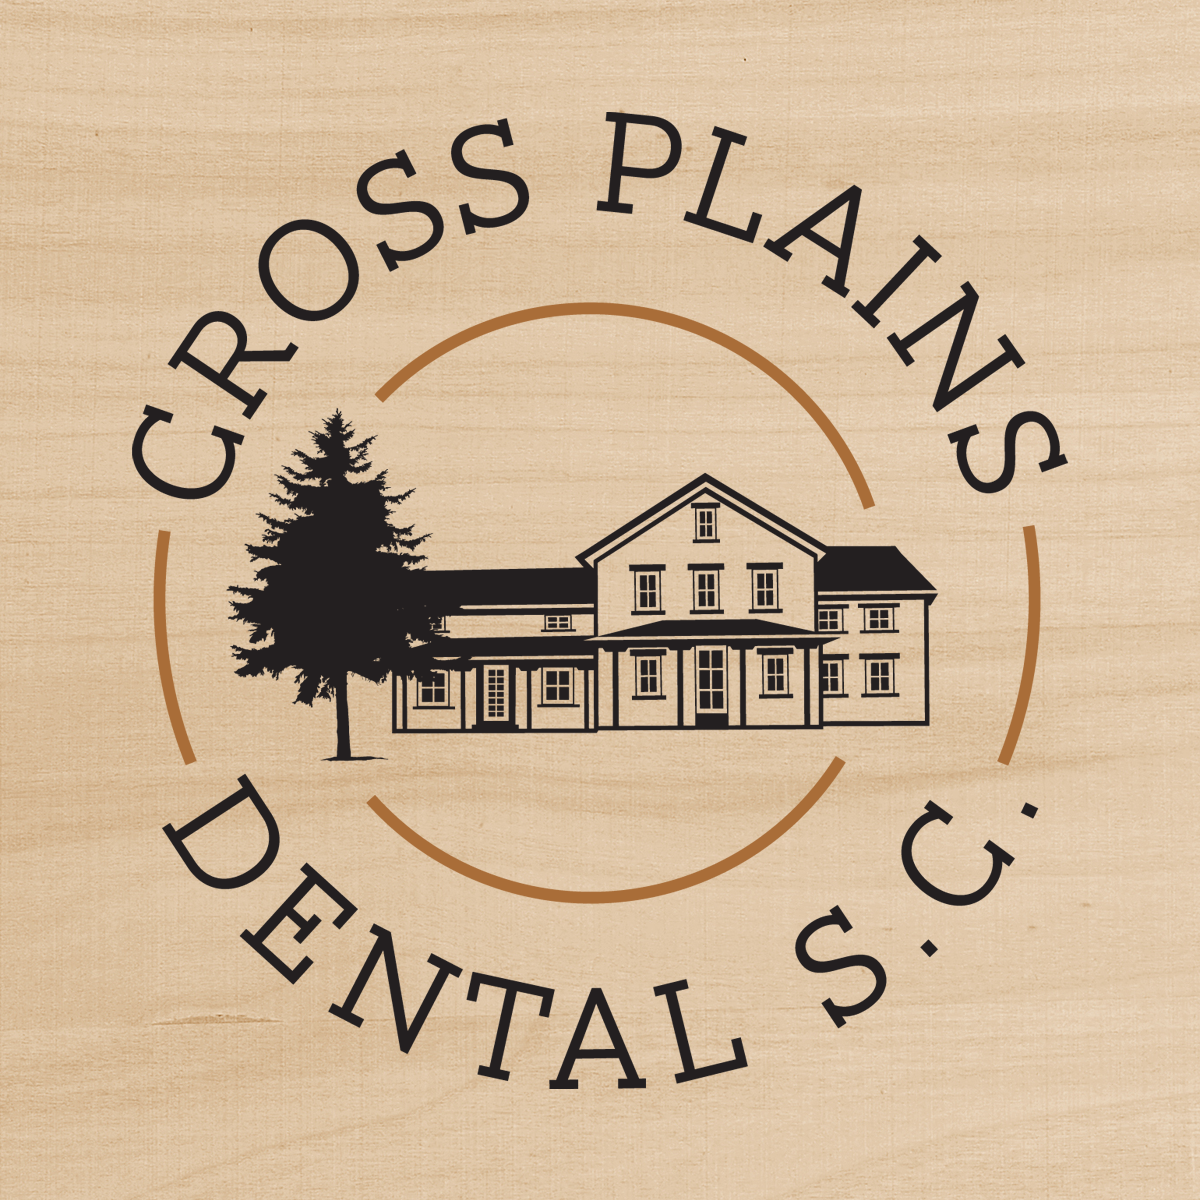 Cross Plains Dental Logo by Tingalls in Madison, WI